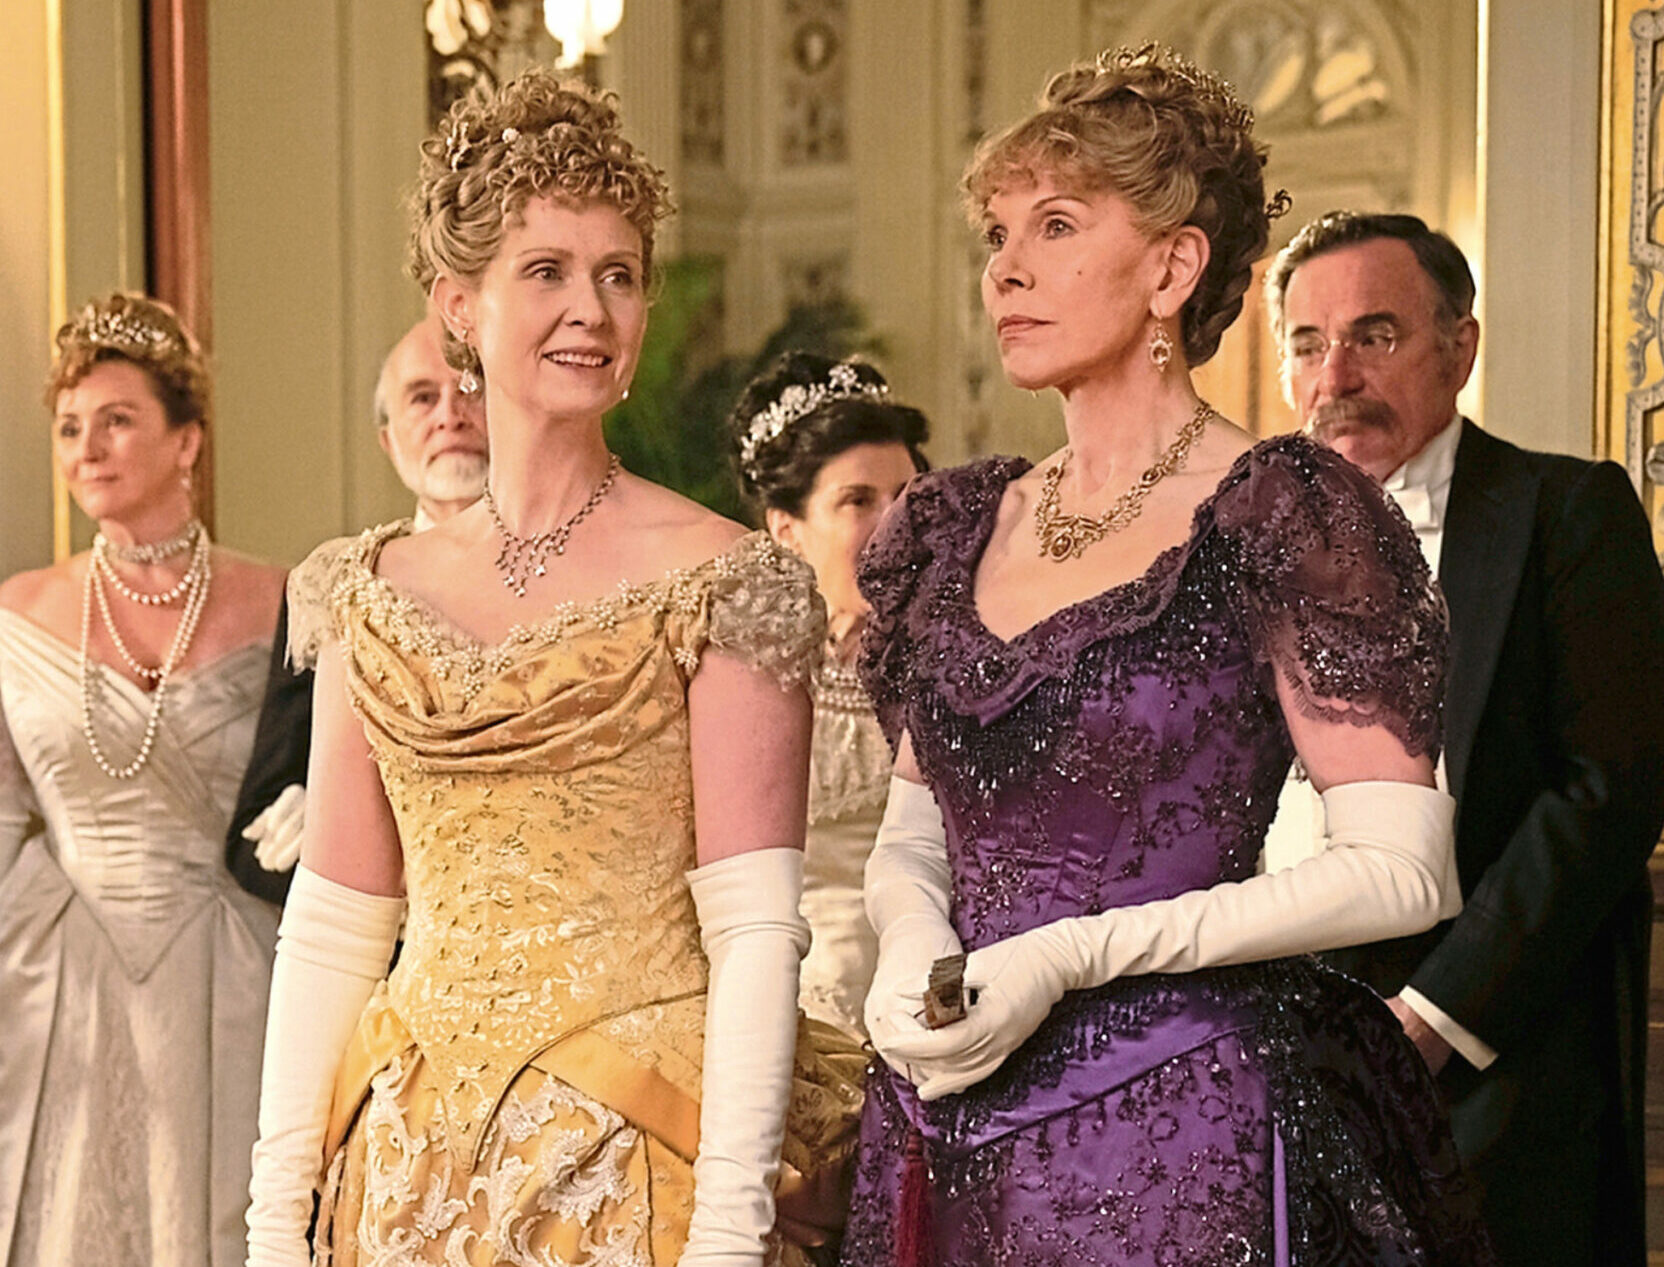 Cynthia Nixon and Christine Baranski star in the upcoming HBO period drama, "The Gilded Age."HBO
Photo: Alison Cohen Rosa/HBO